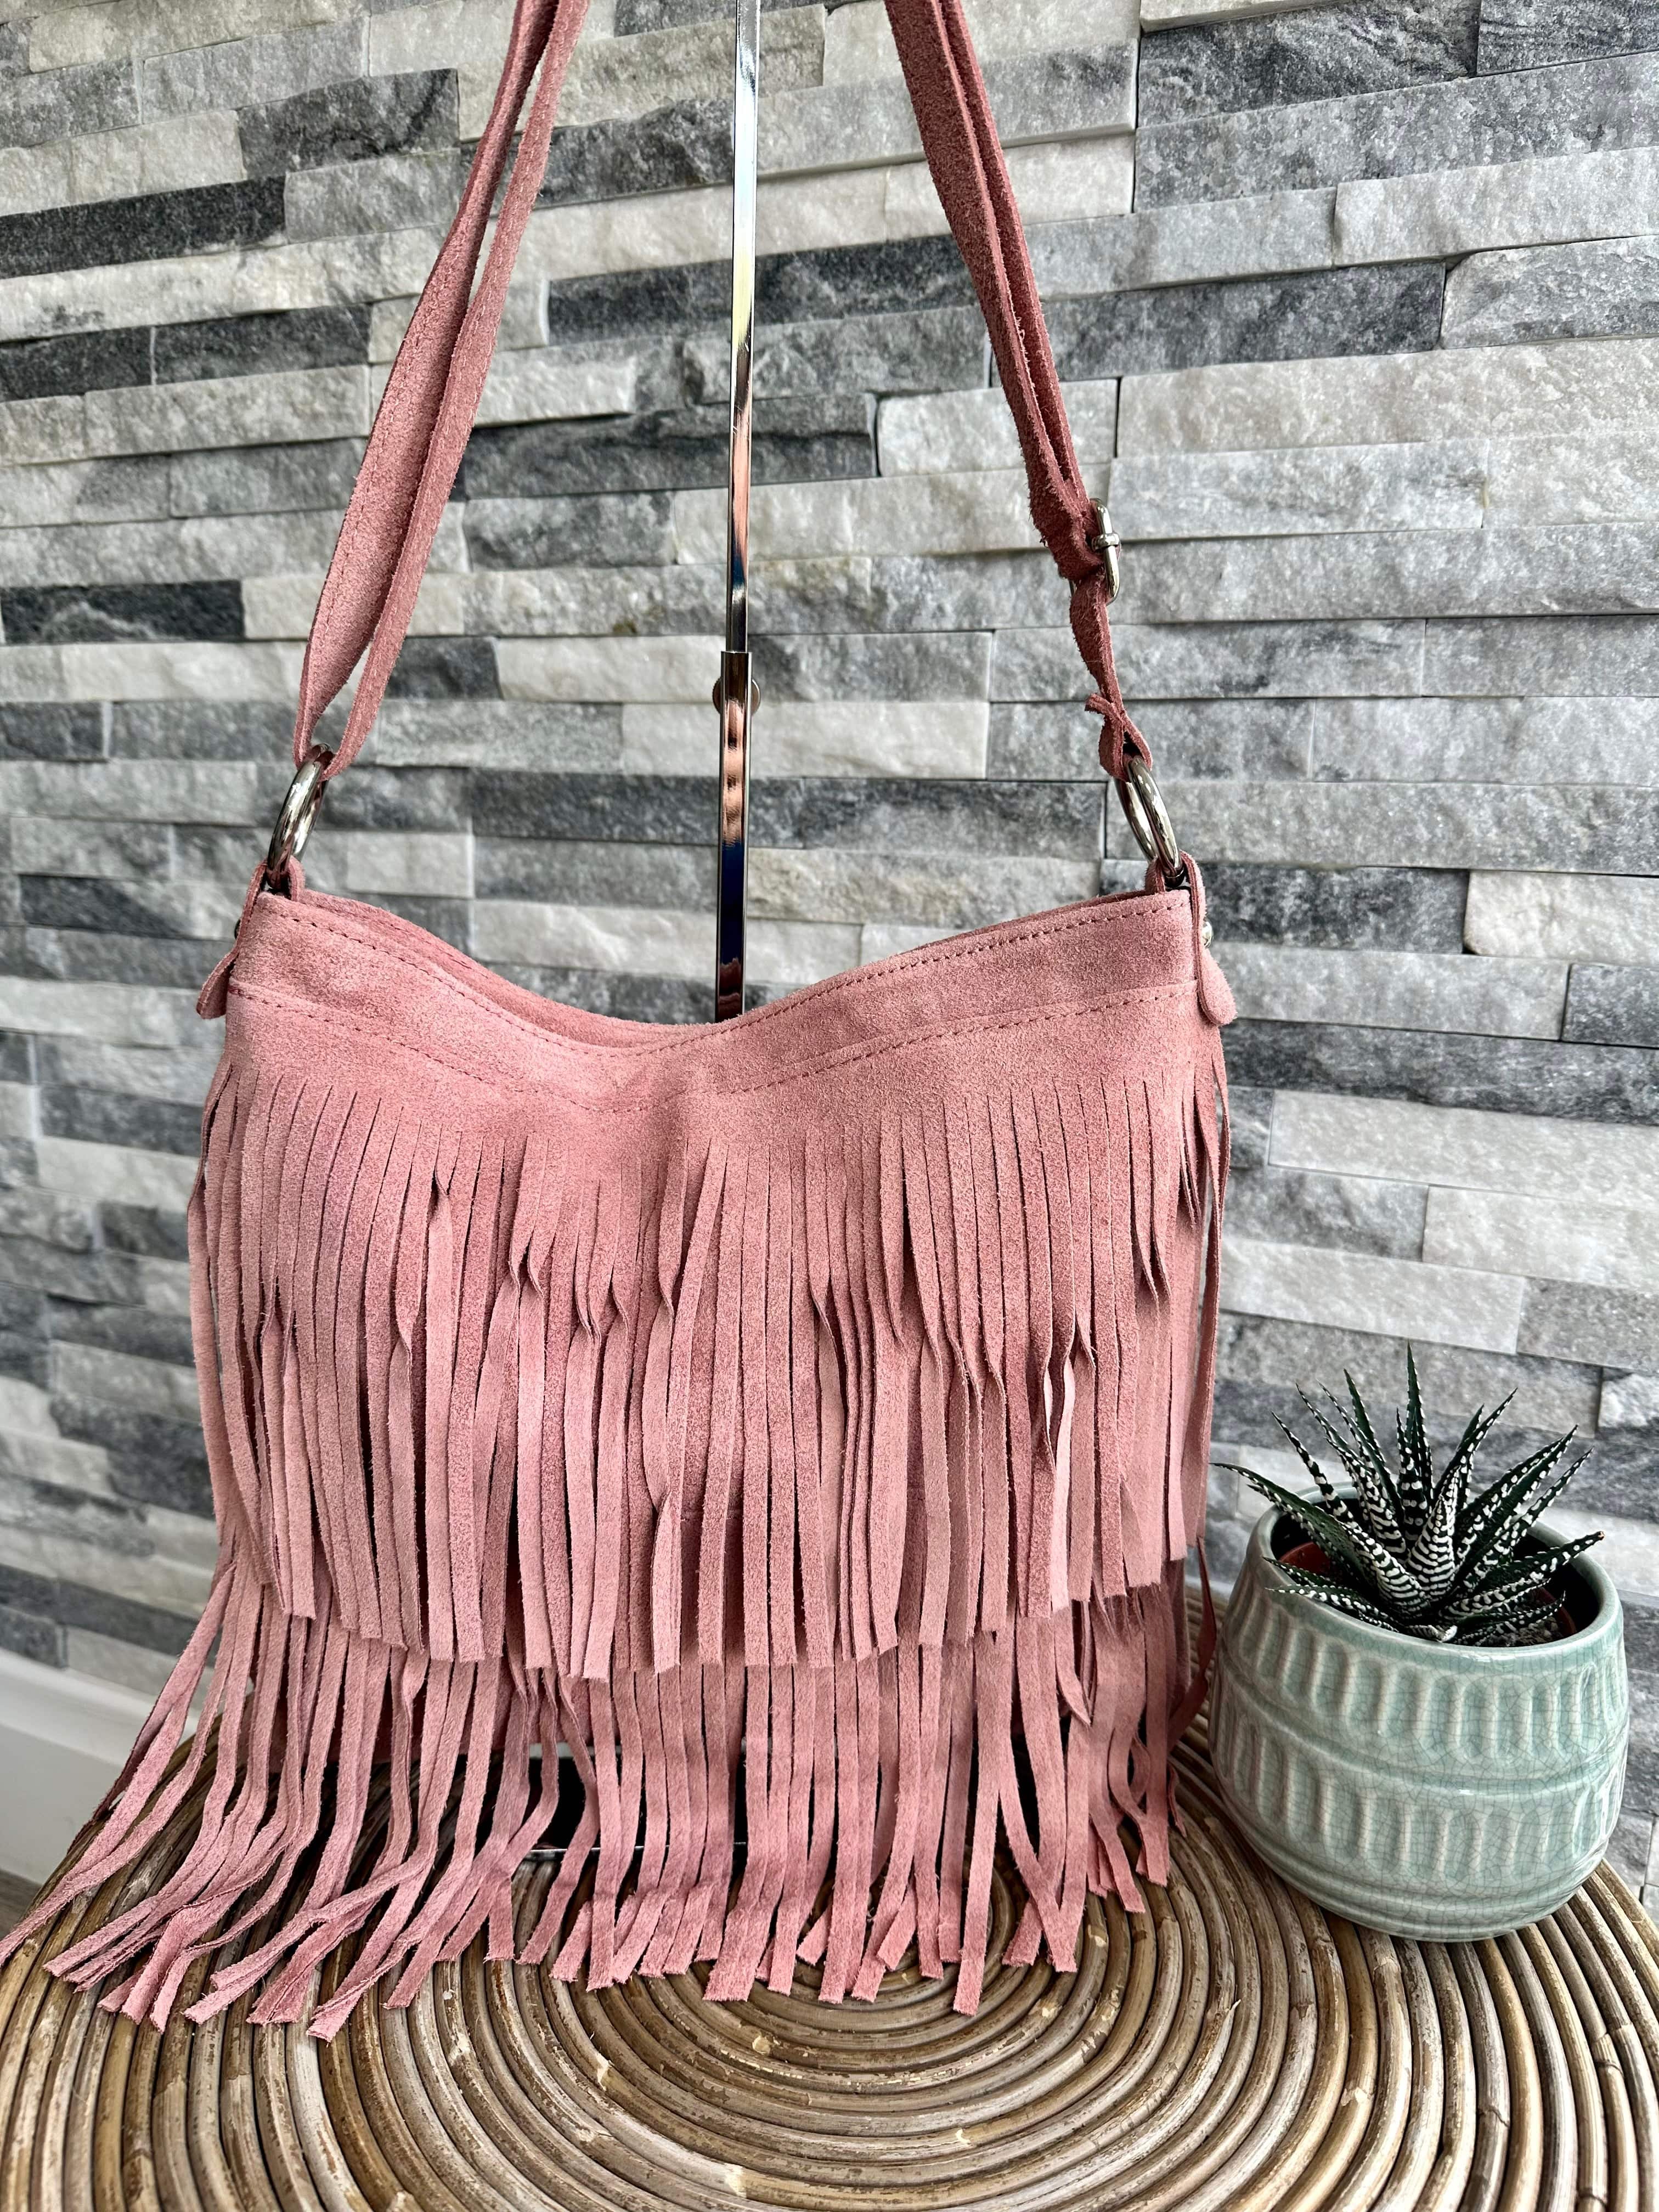 luscious scarves Pale Pink Italian Suede Leather Tassel, Fringe Crossbody / Shoulder Bag . 7 Colours Available